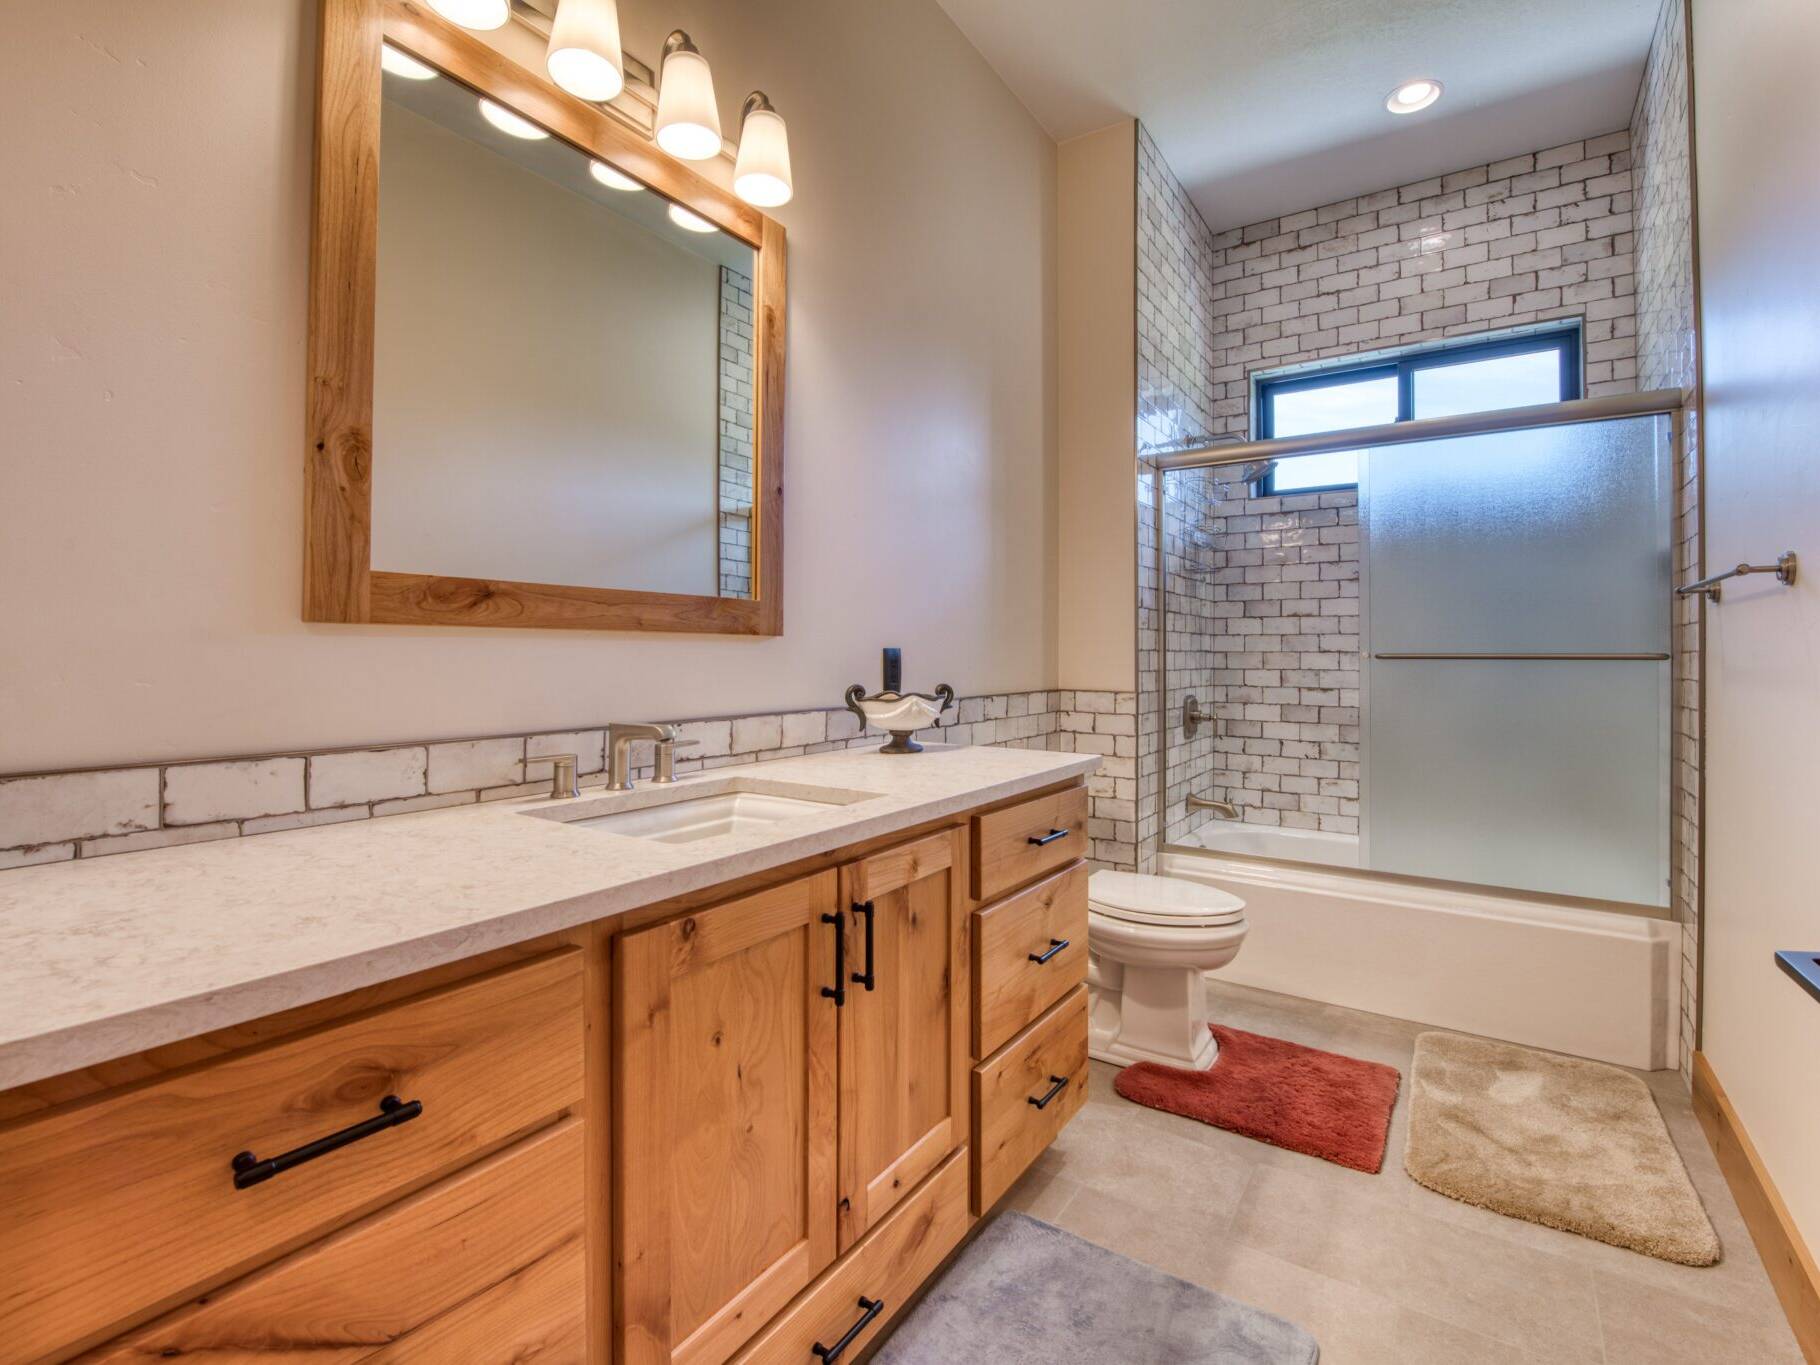 Bathroom with alder cabinets, granite countertop, tile floors and tile tub-shower surround in a custom home built by Big Sky Builders of Montana in Florence, MT